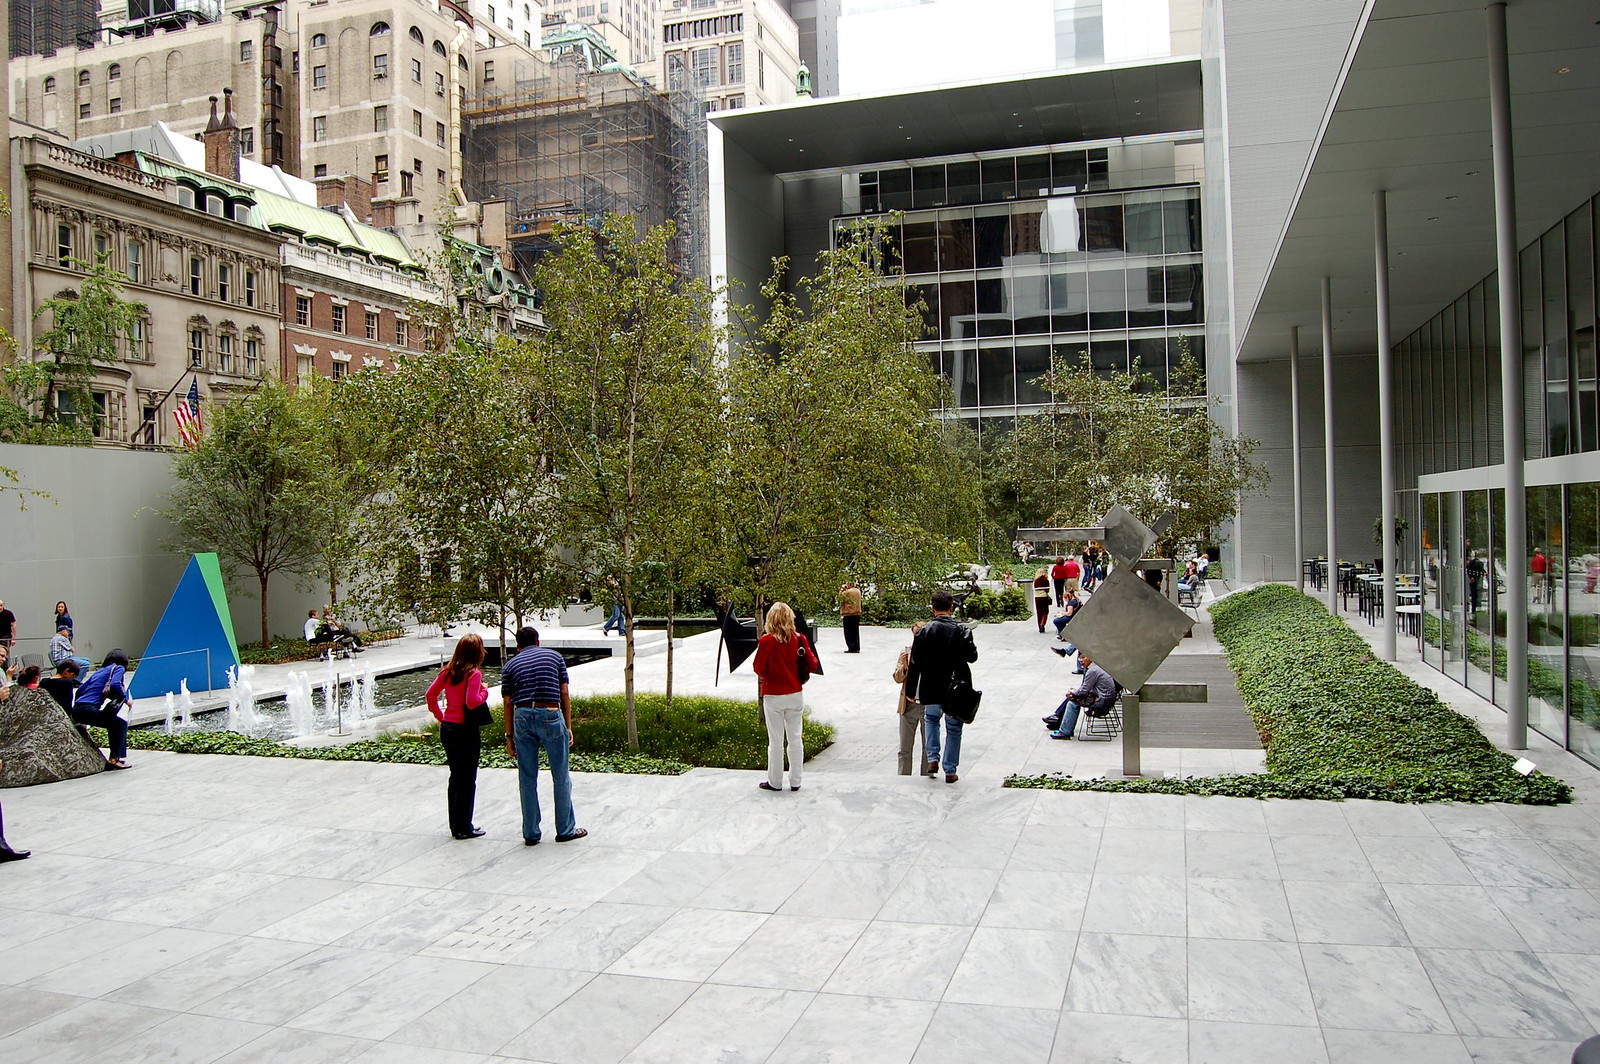 MoMA | The Museum of Modern Art